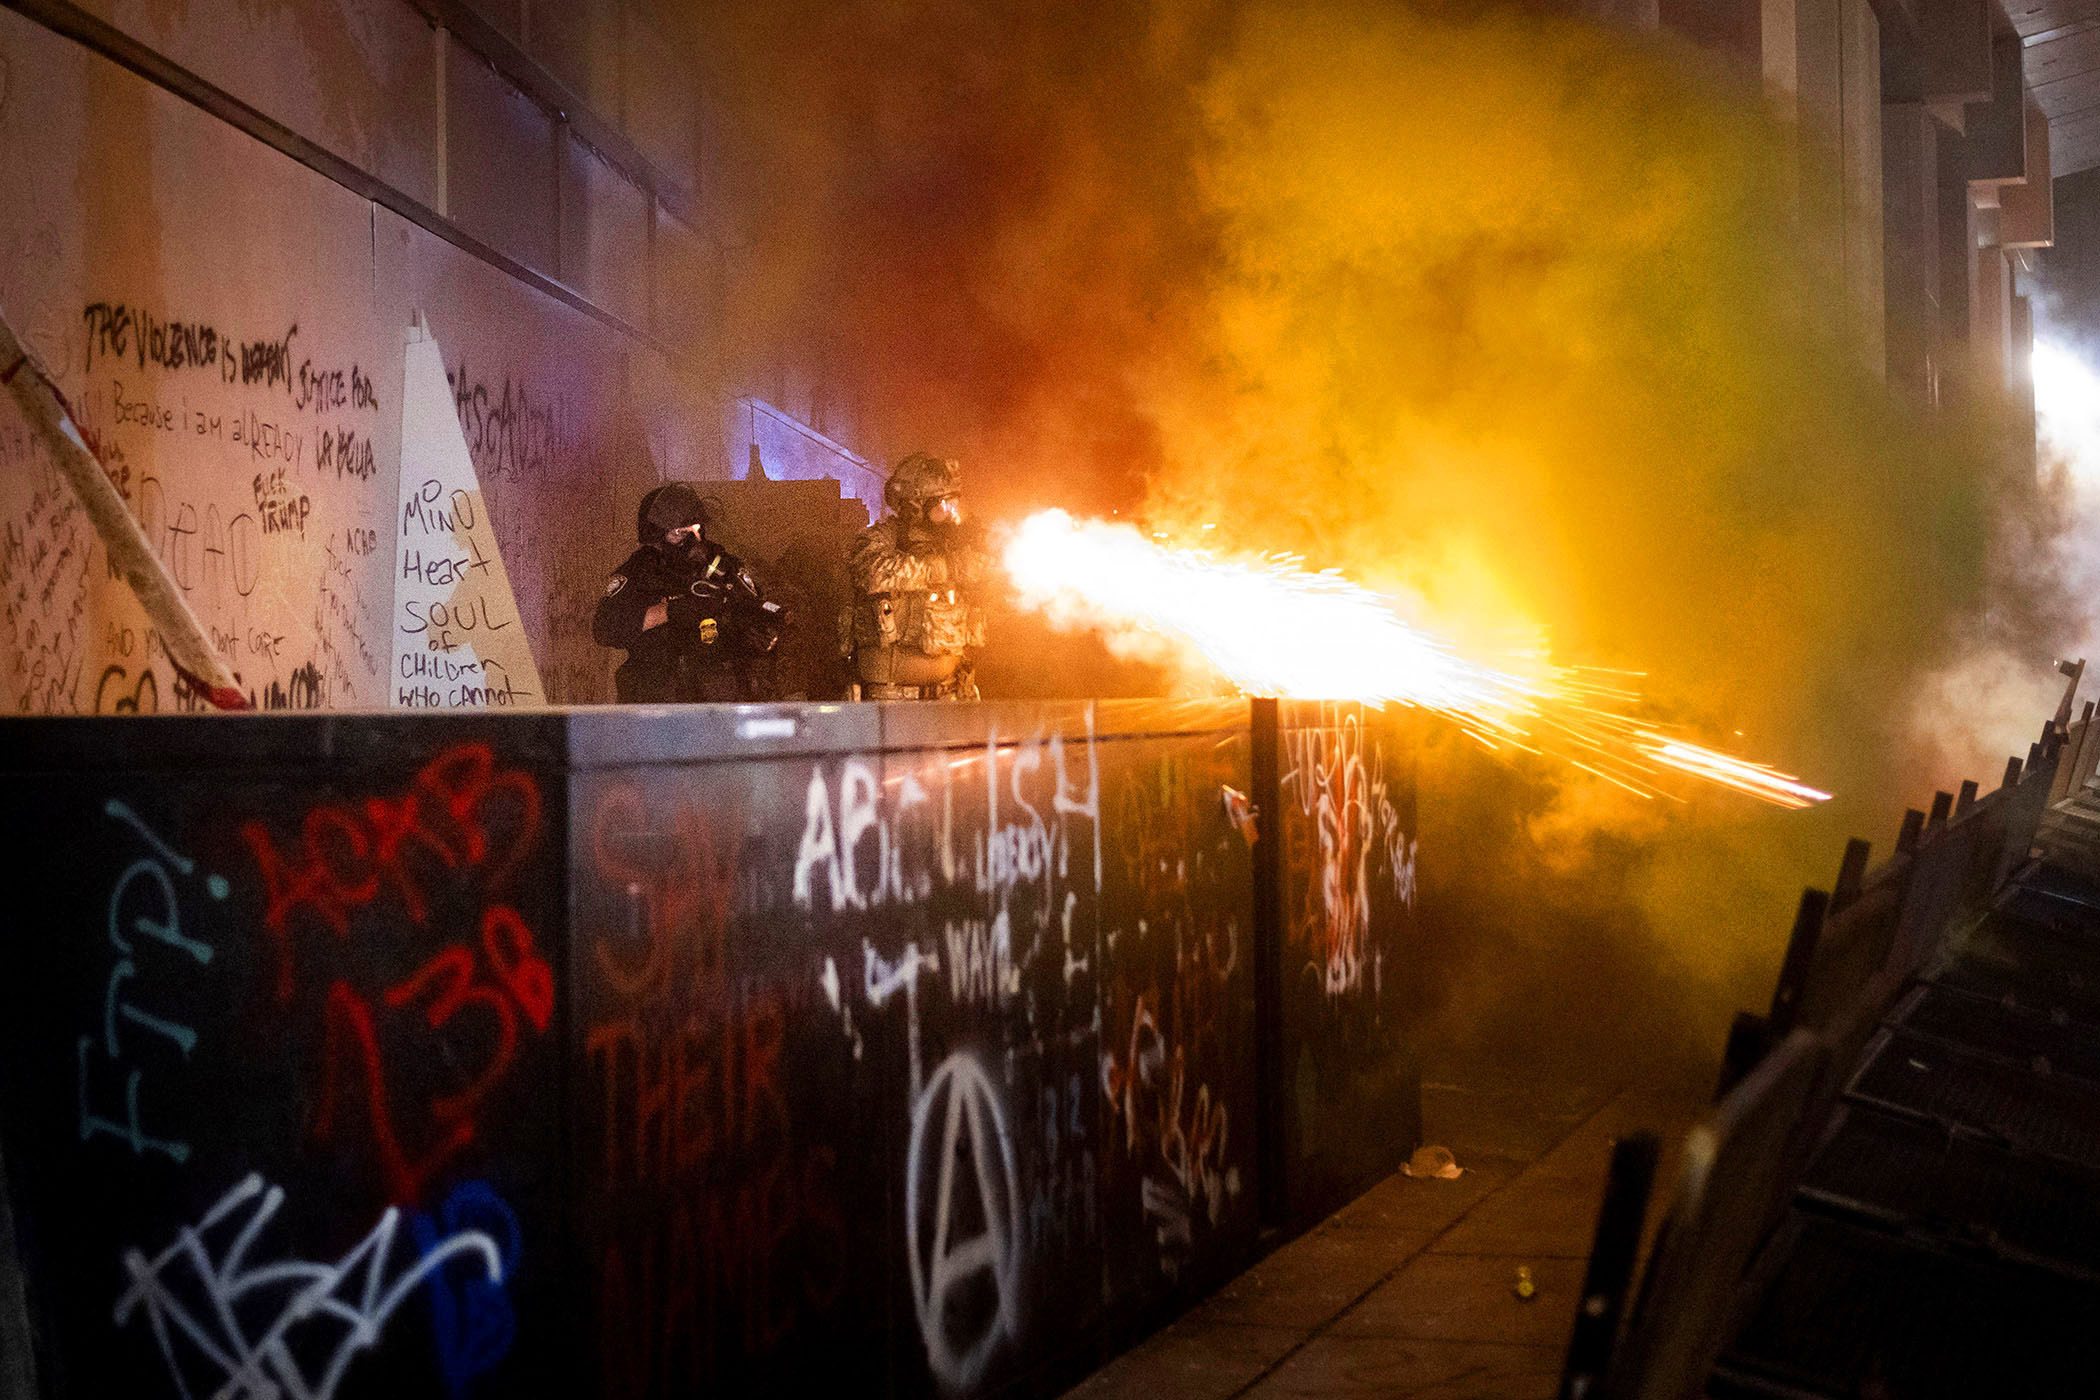 Standing behind a barrier covered in graffiti, a federal officer dressed in camouflage fires an explosive-looking munition